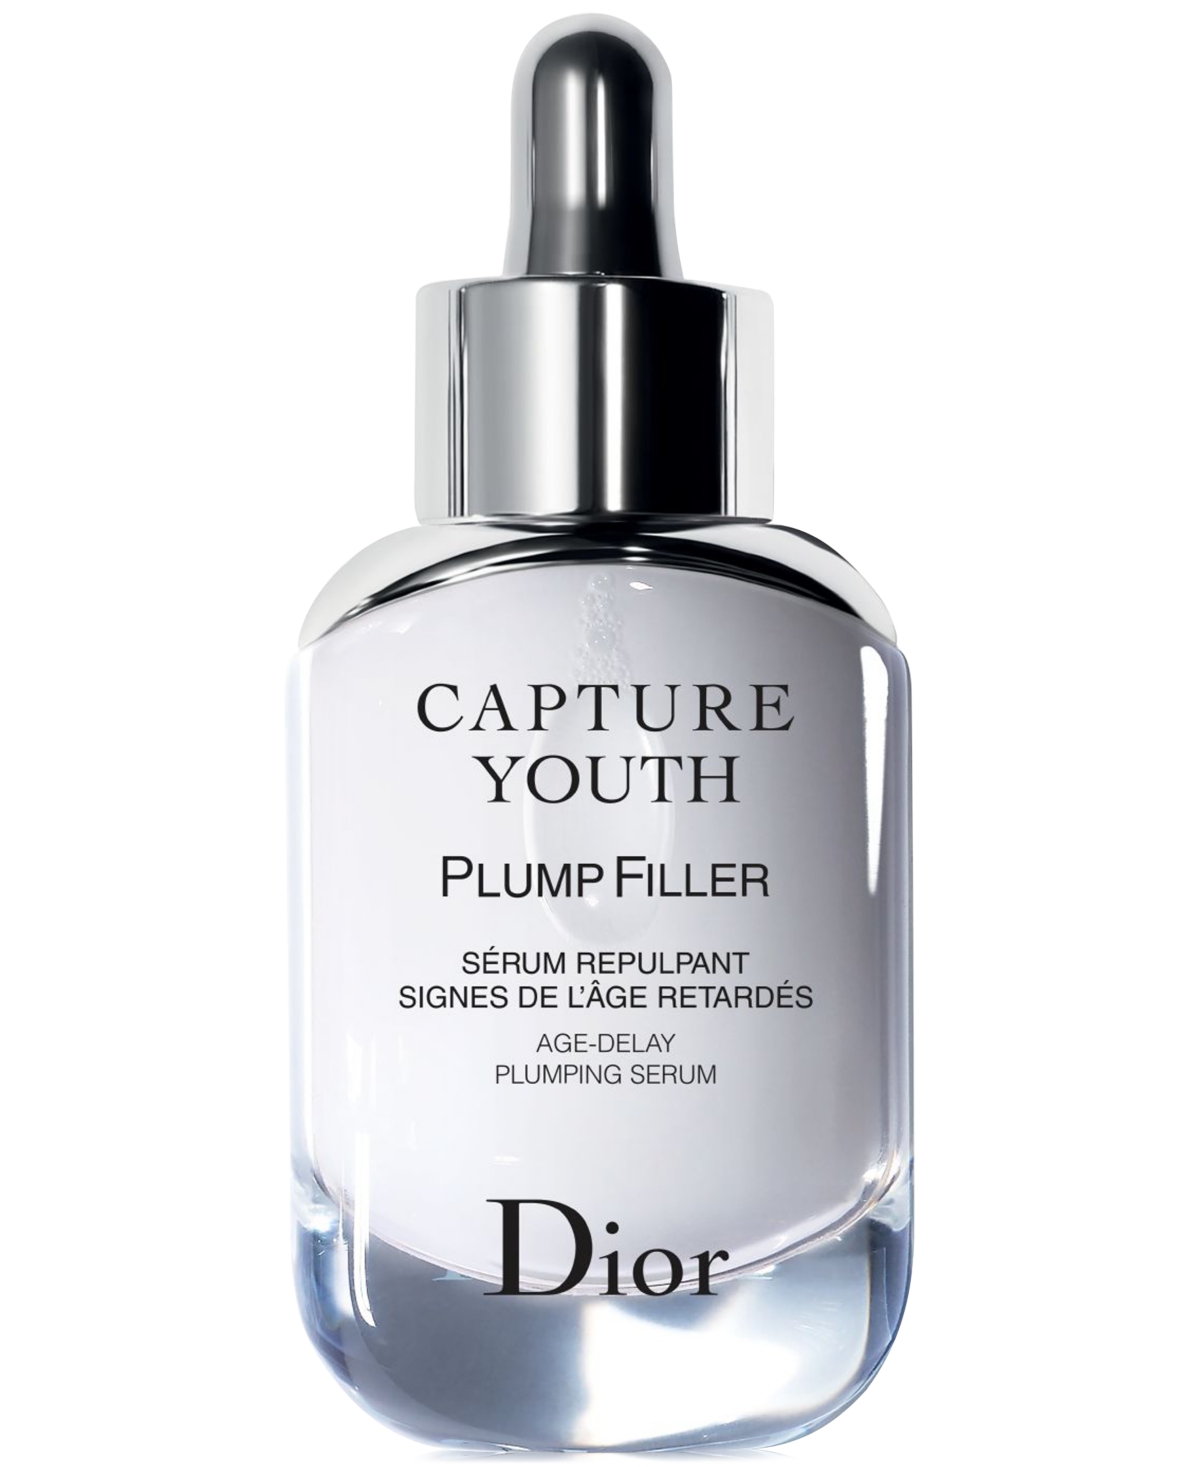 Dior Capture Youth Plump Filler Age-delay Plumping Serum In No Color